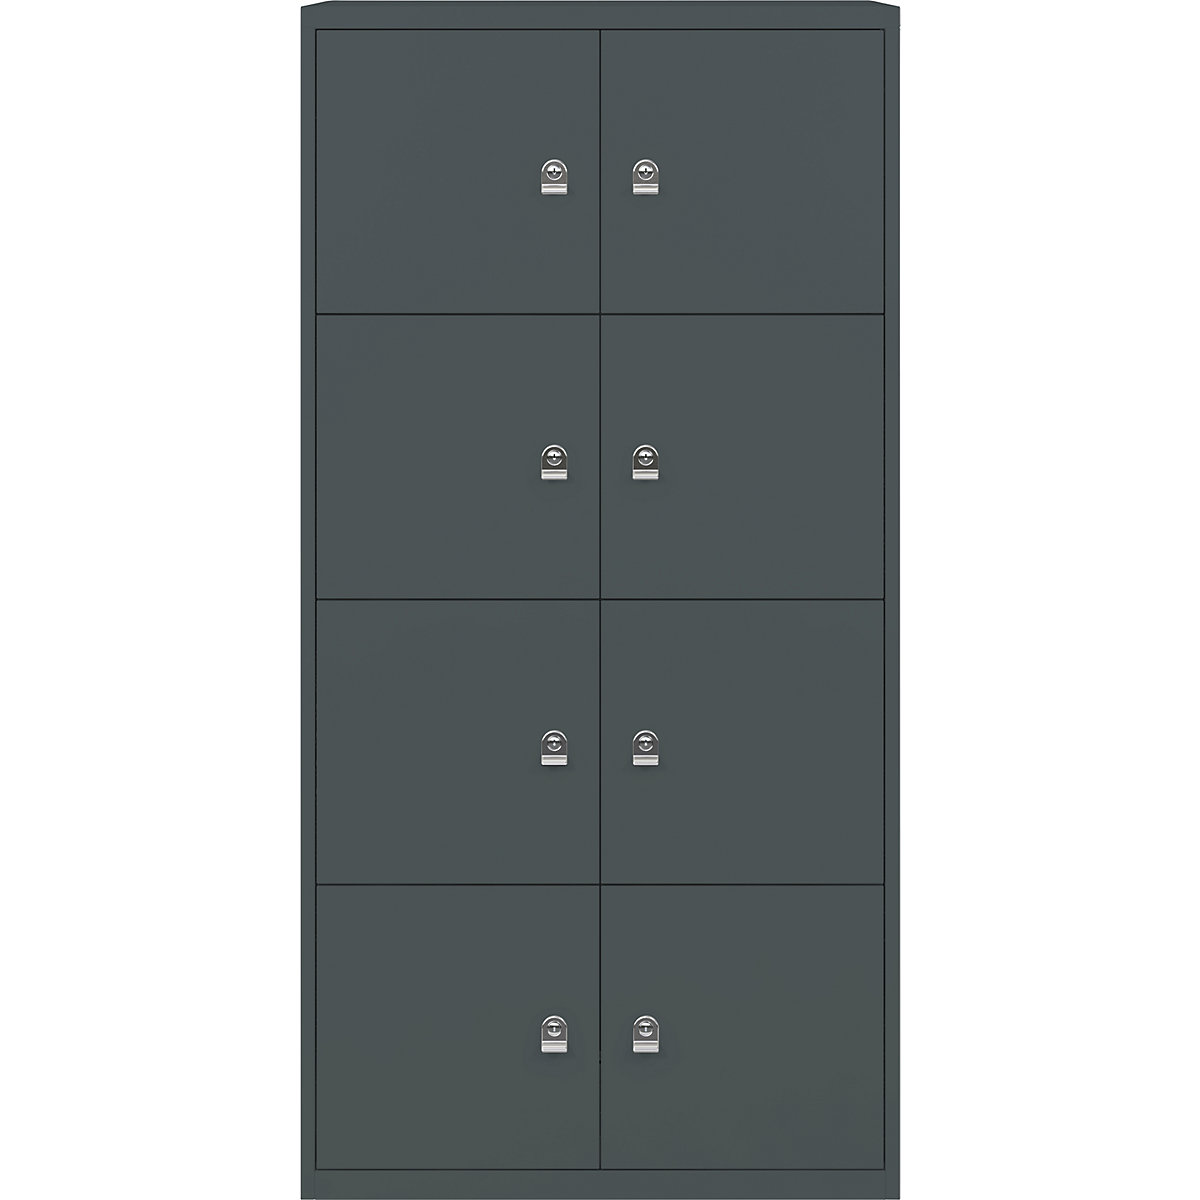 BISLEY – LateralFile™ lodge, with 8 lockable compartments, height 375 mm each, slate